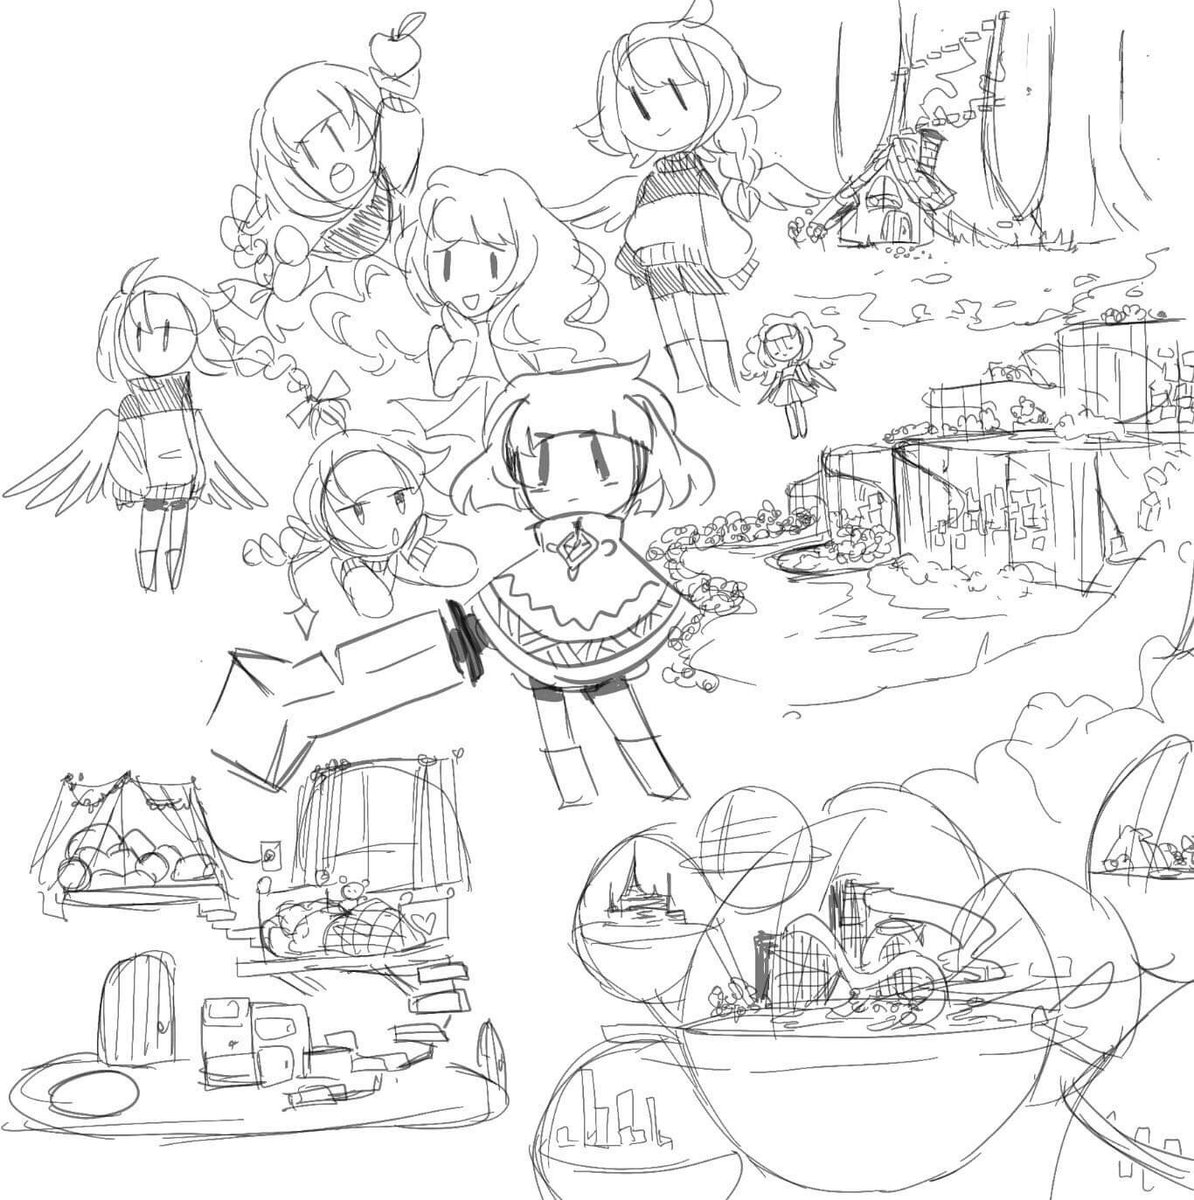 here are some older doodles from last year, like peregrines house, one of the towns on cemend, and some of cemends grace designs 

also peregrine's design is different here and there are some characters who have changed a lot 